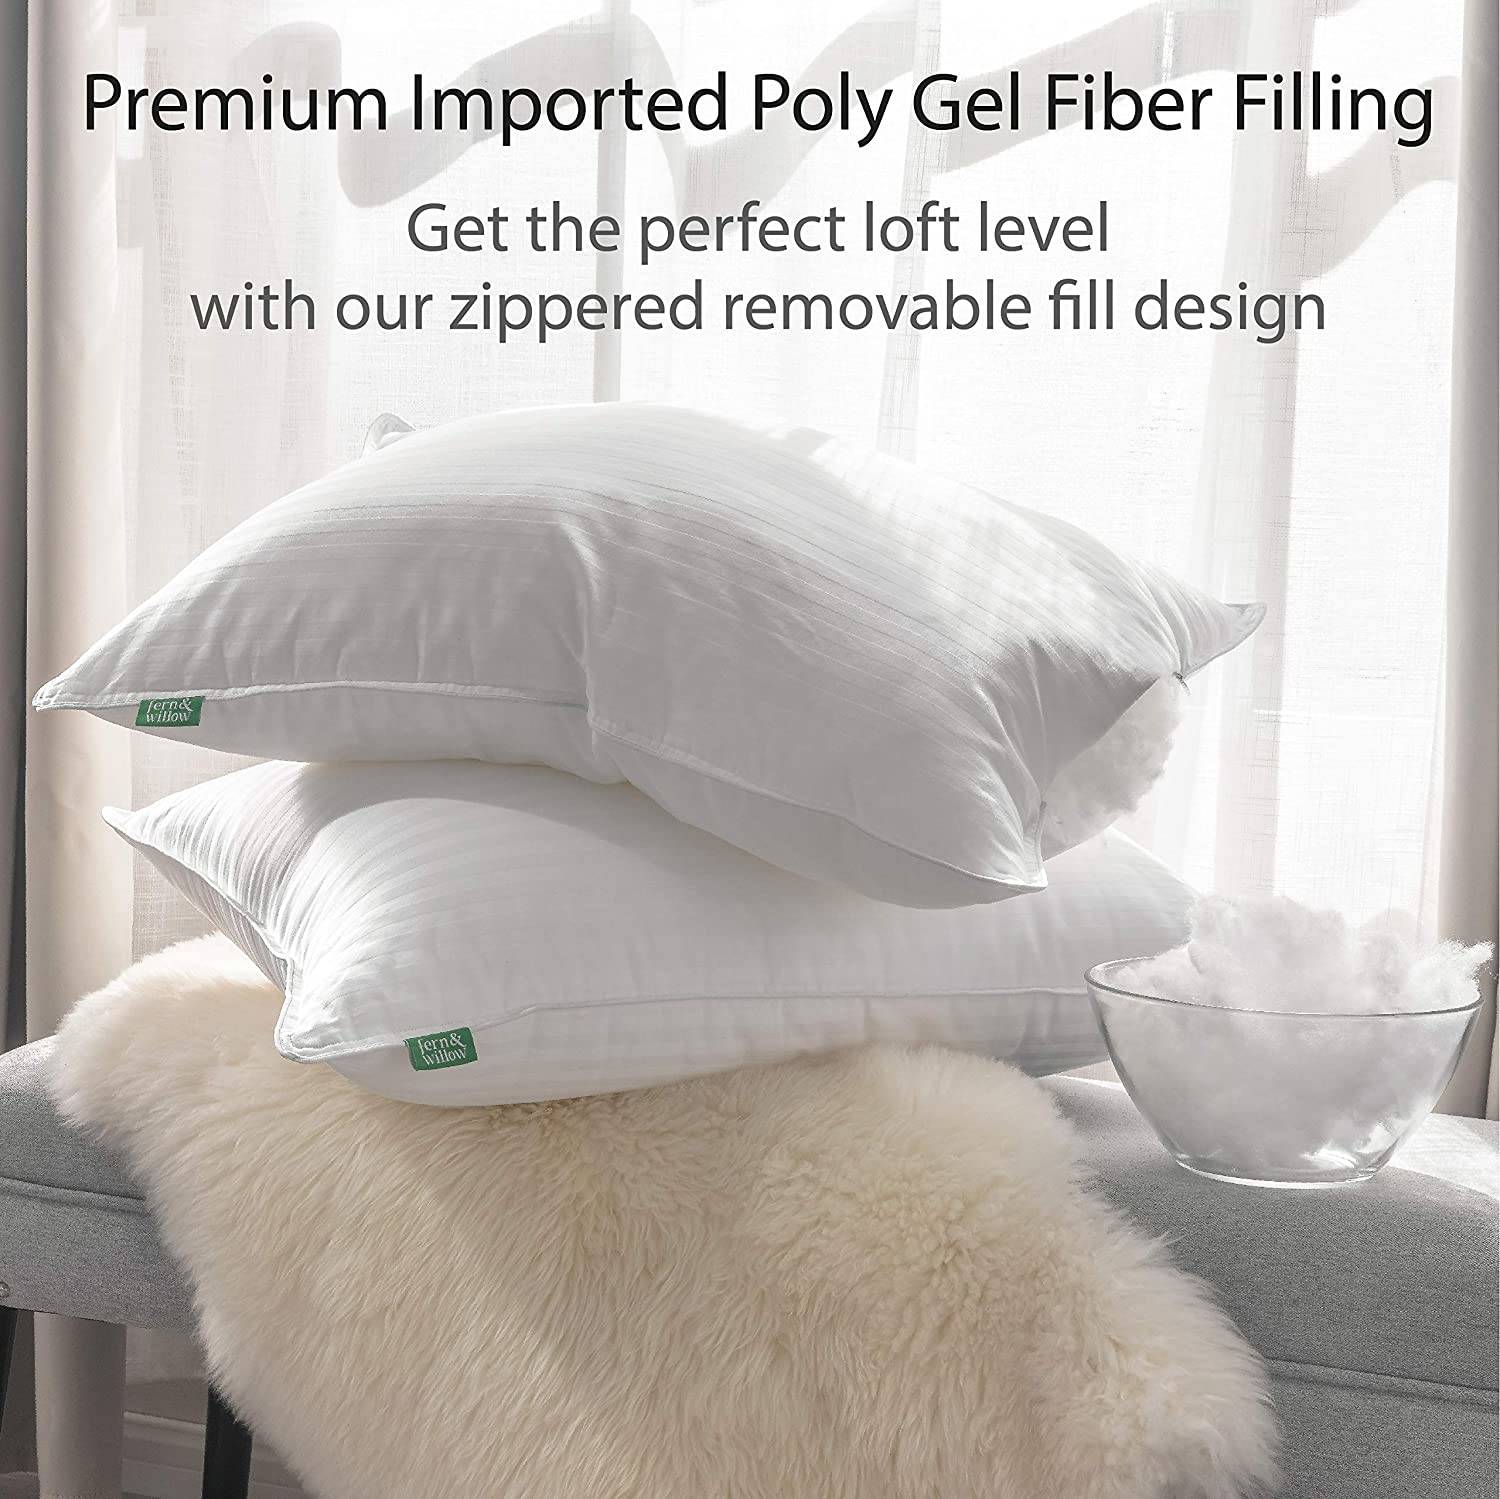 Fern and Willow Queen Size Cooling Gel Pillows, Set of 2 for All Sleepers